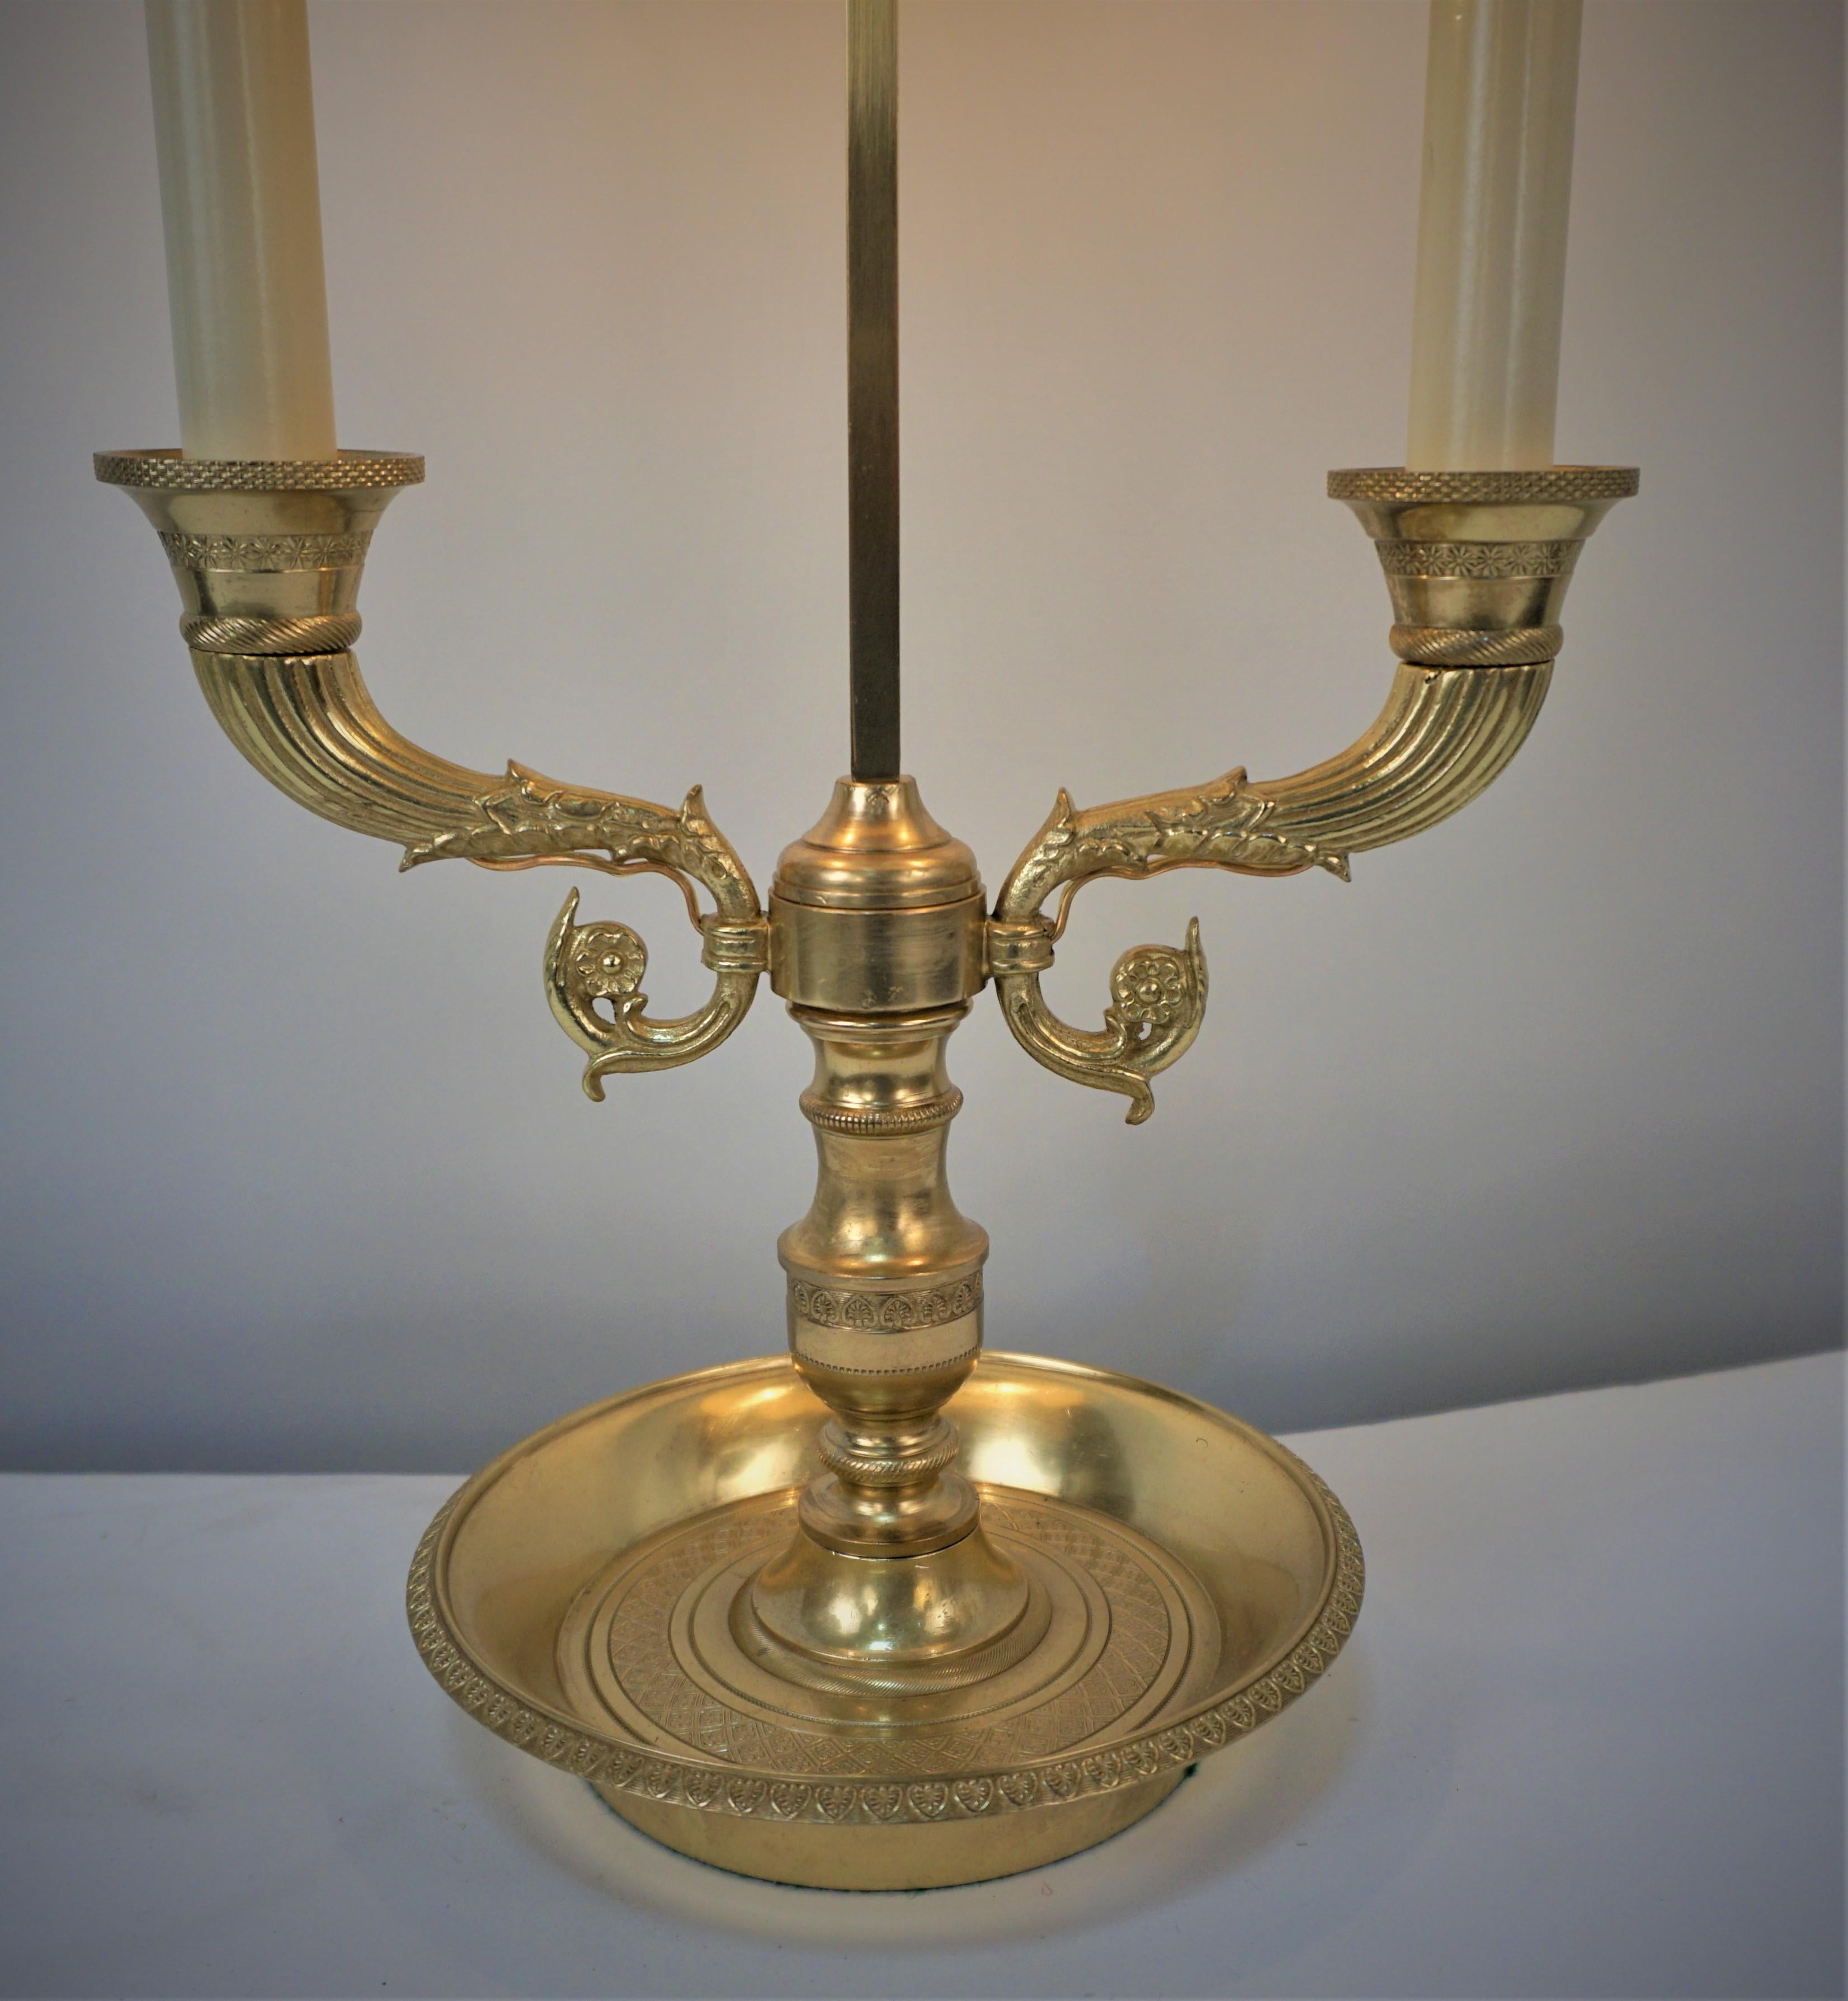 Crafted in early 20th century France, this table lamp features a beautiful bronze candelabra base. The lamp has been professionally electrified and restored and has two lights.